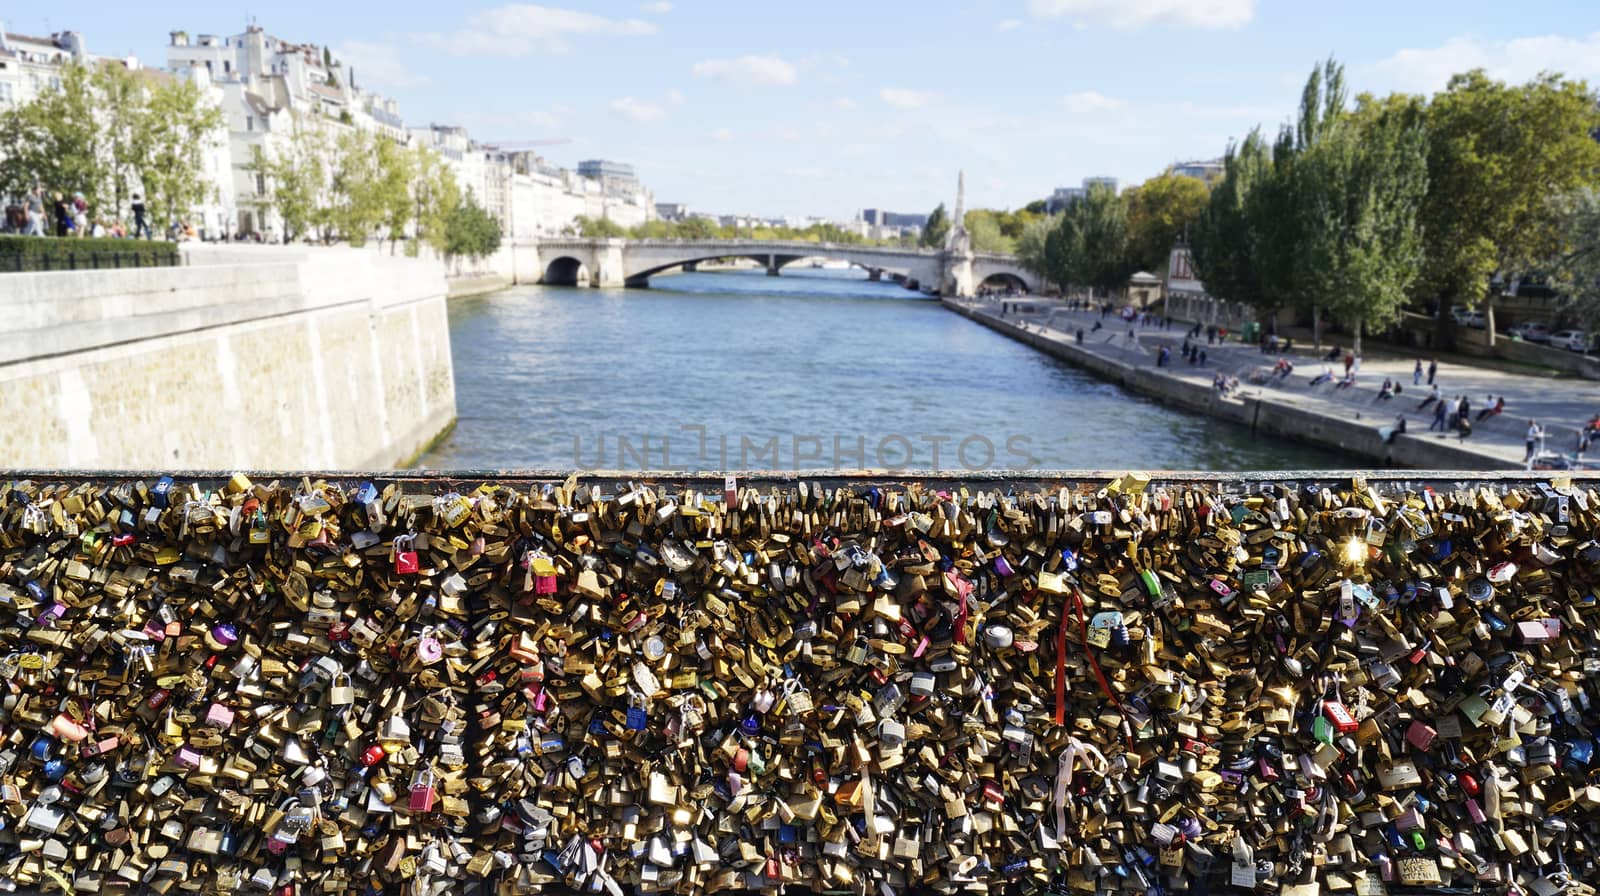 Love locks at the Archbishop's bridge in Paris by magraphics